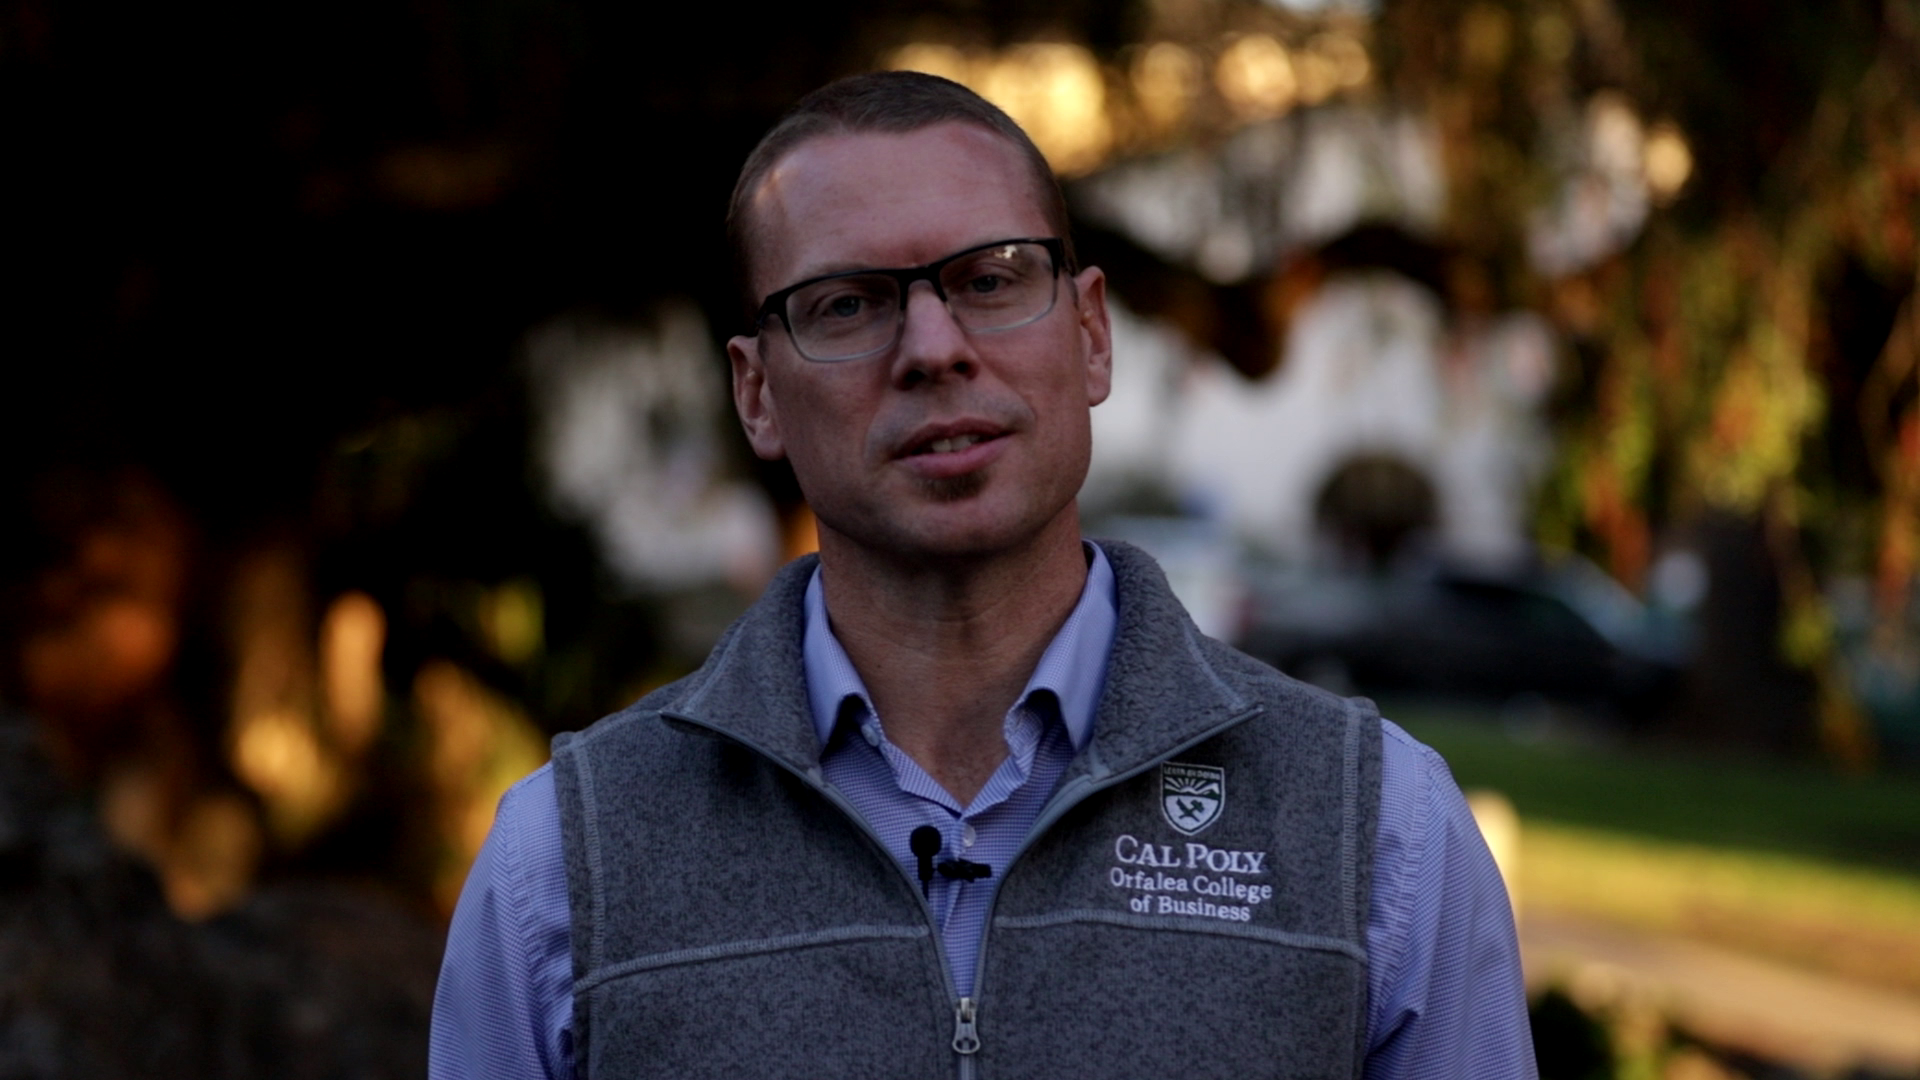 Cal Poly’s Orfalea College Of Business Dean Dr. Damon M. Fleming